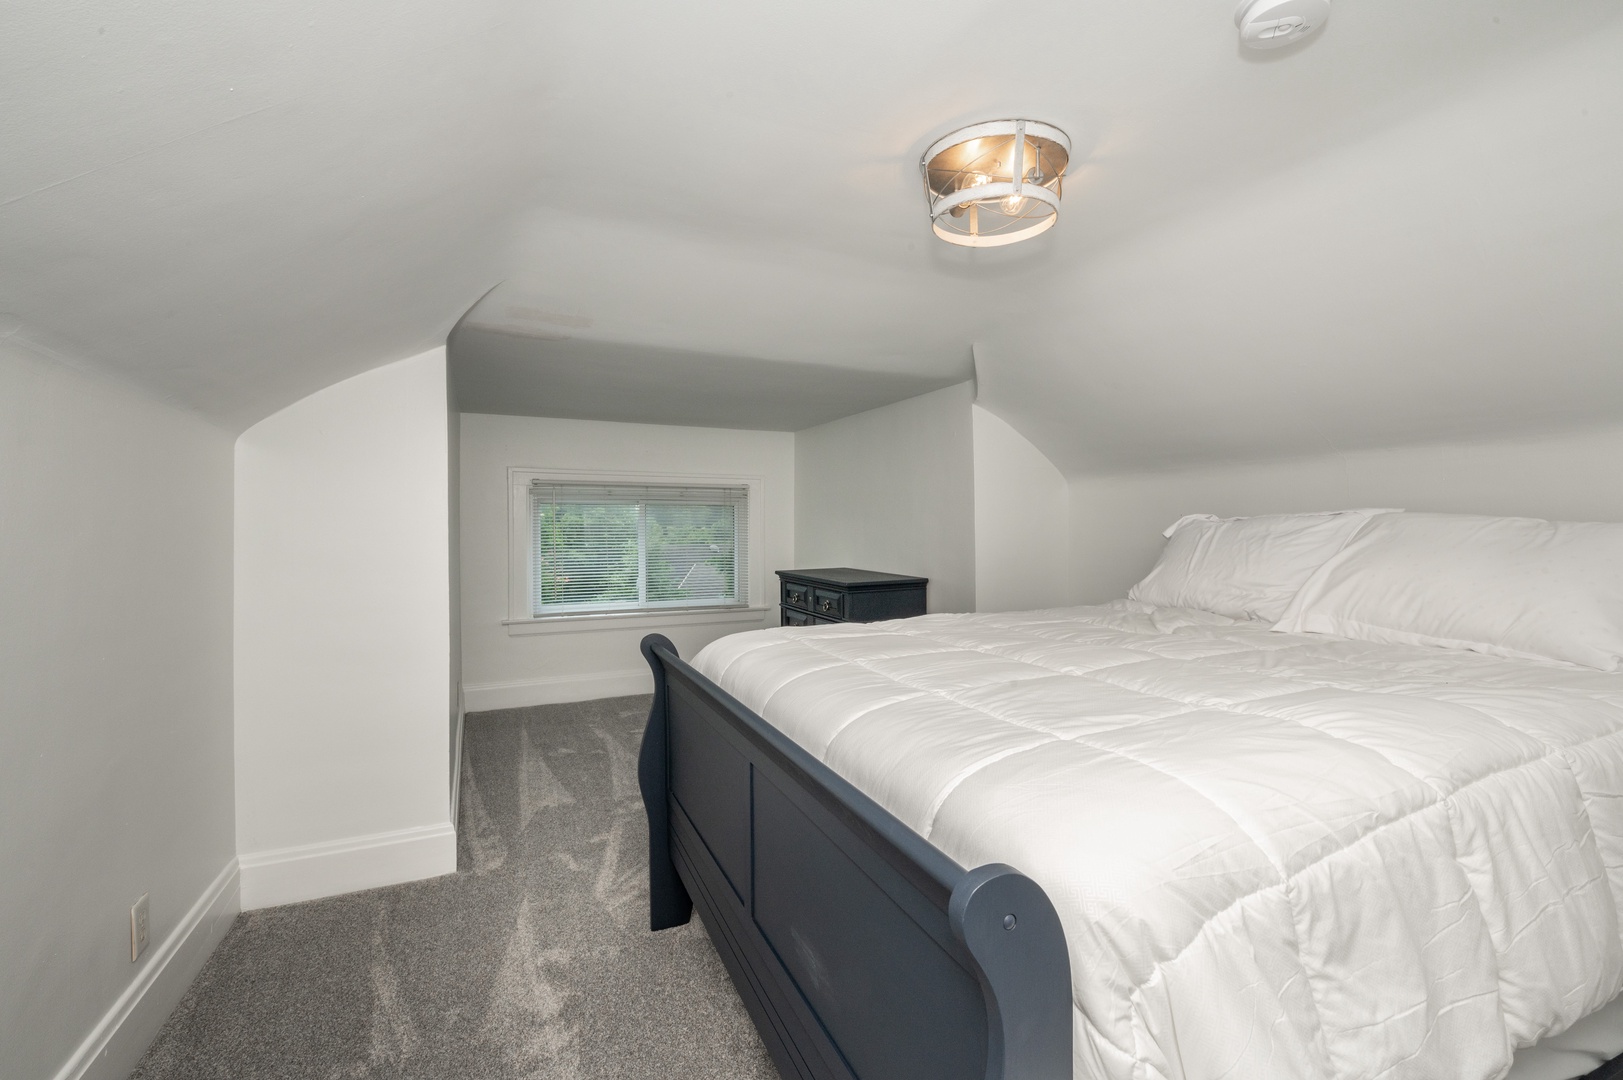 The final spacious bedroom includes a queen bed & dresser